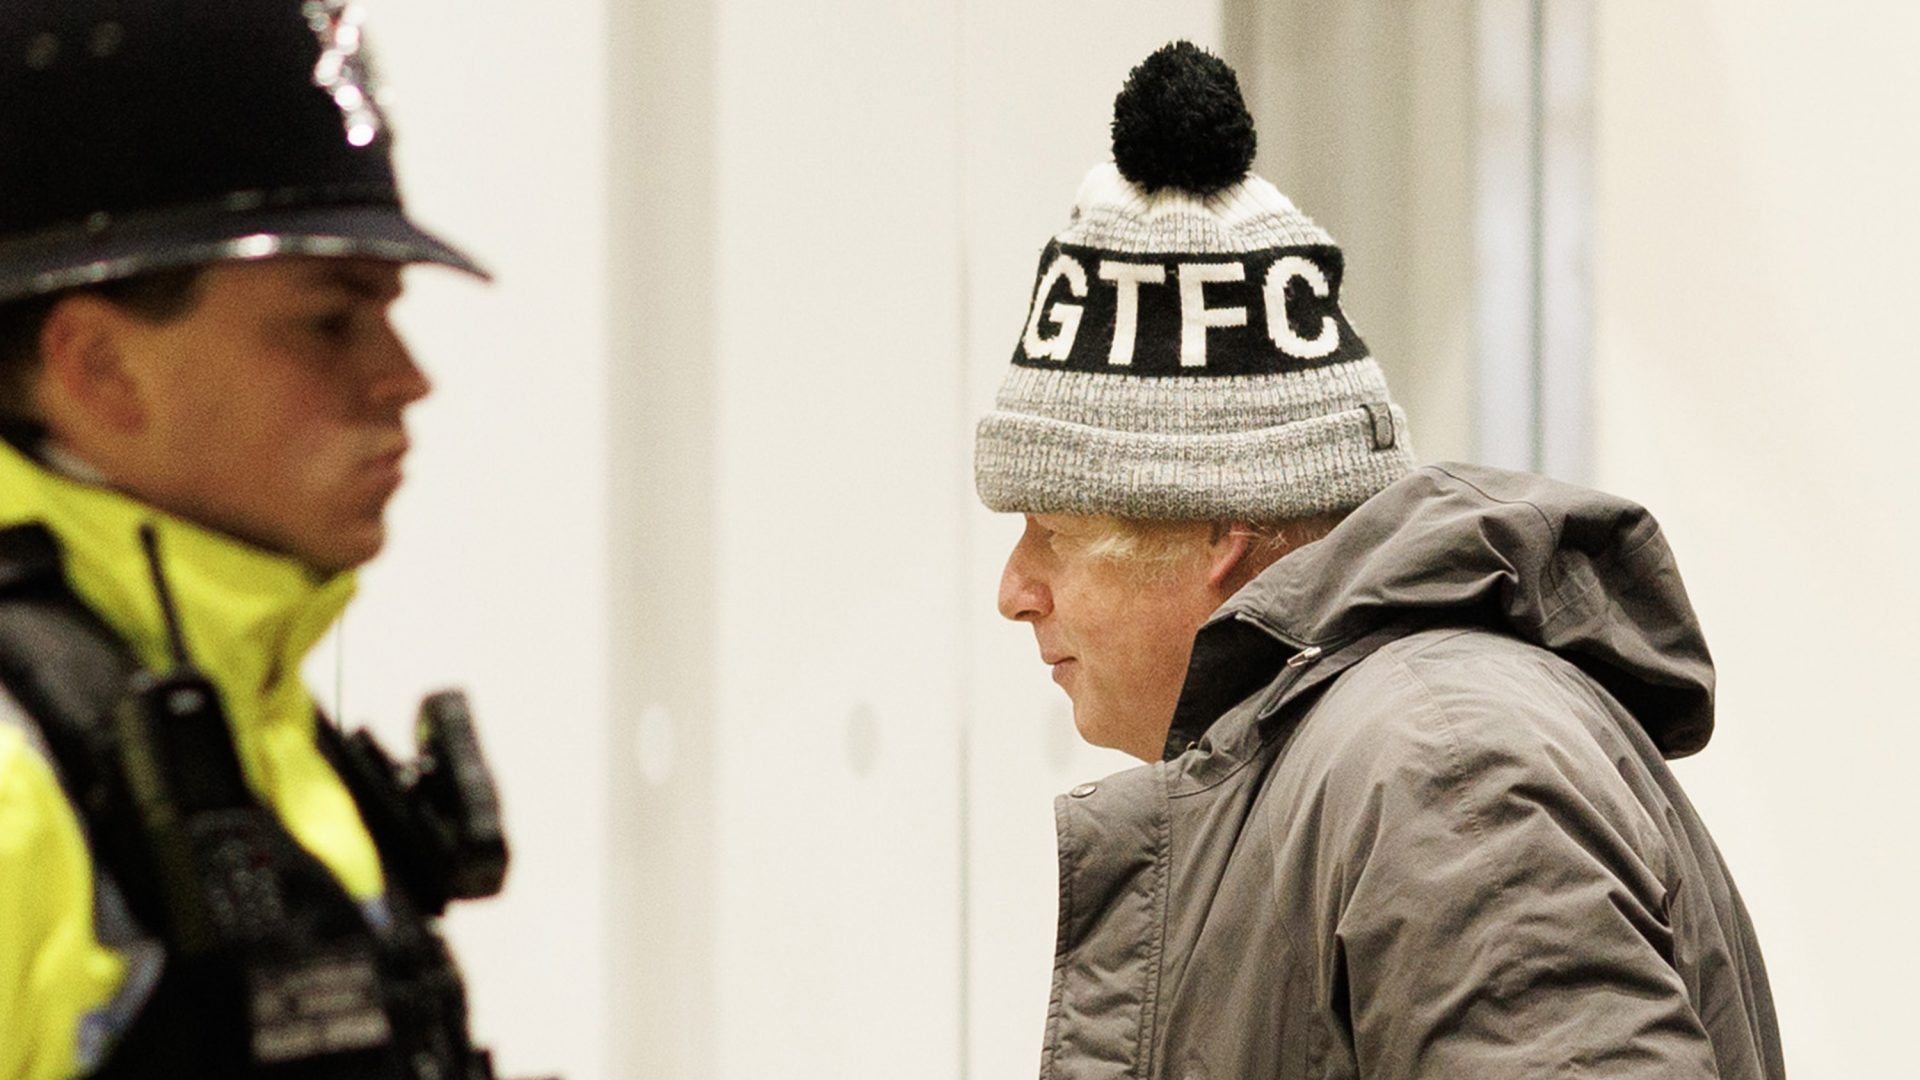 ormer British Prime Minister Boris Johnson (wearing a Grimsby Town F.C hat) arrives to testify at the Covid Inquiry. Photo: Dan Kitwood/Getty Images